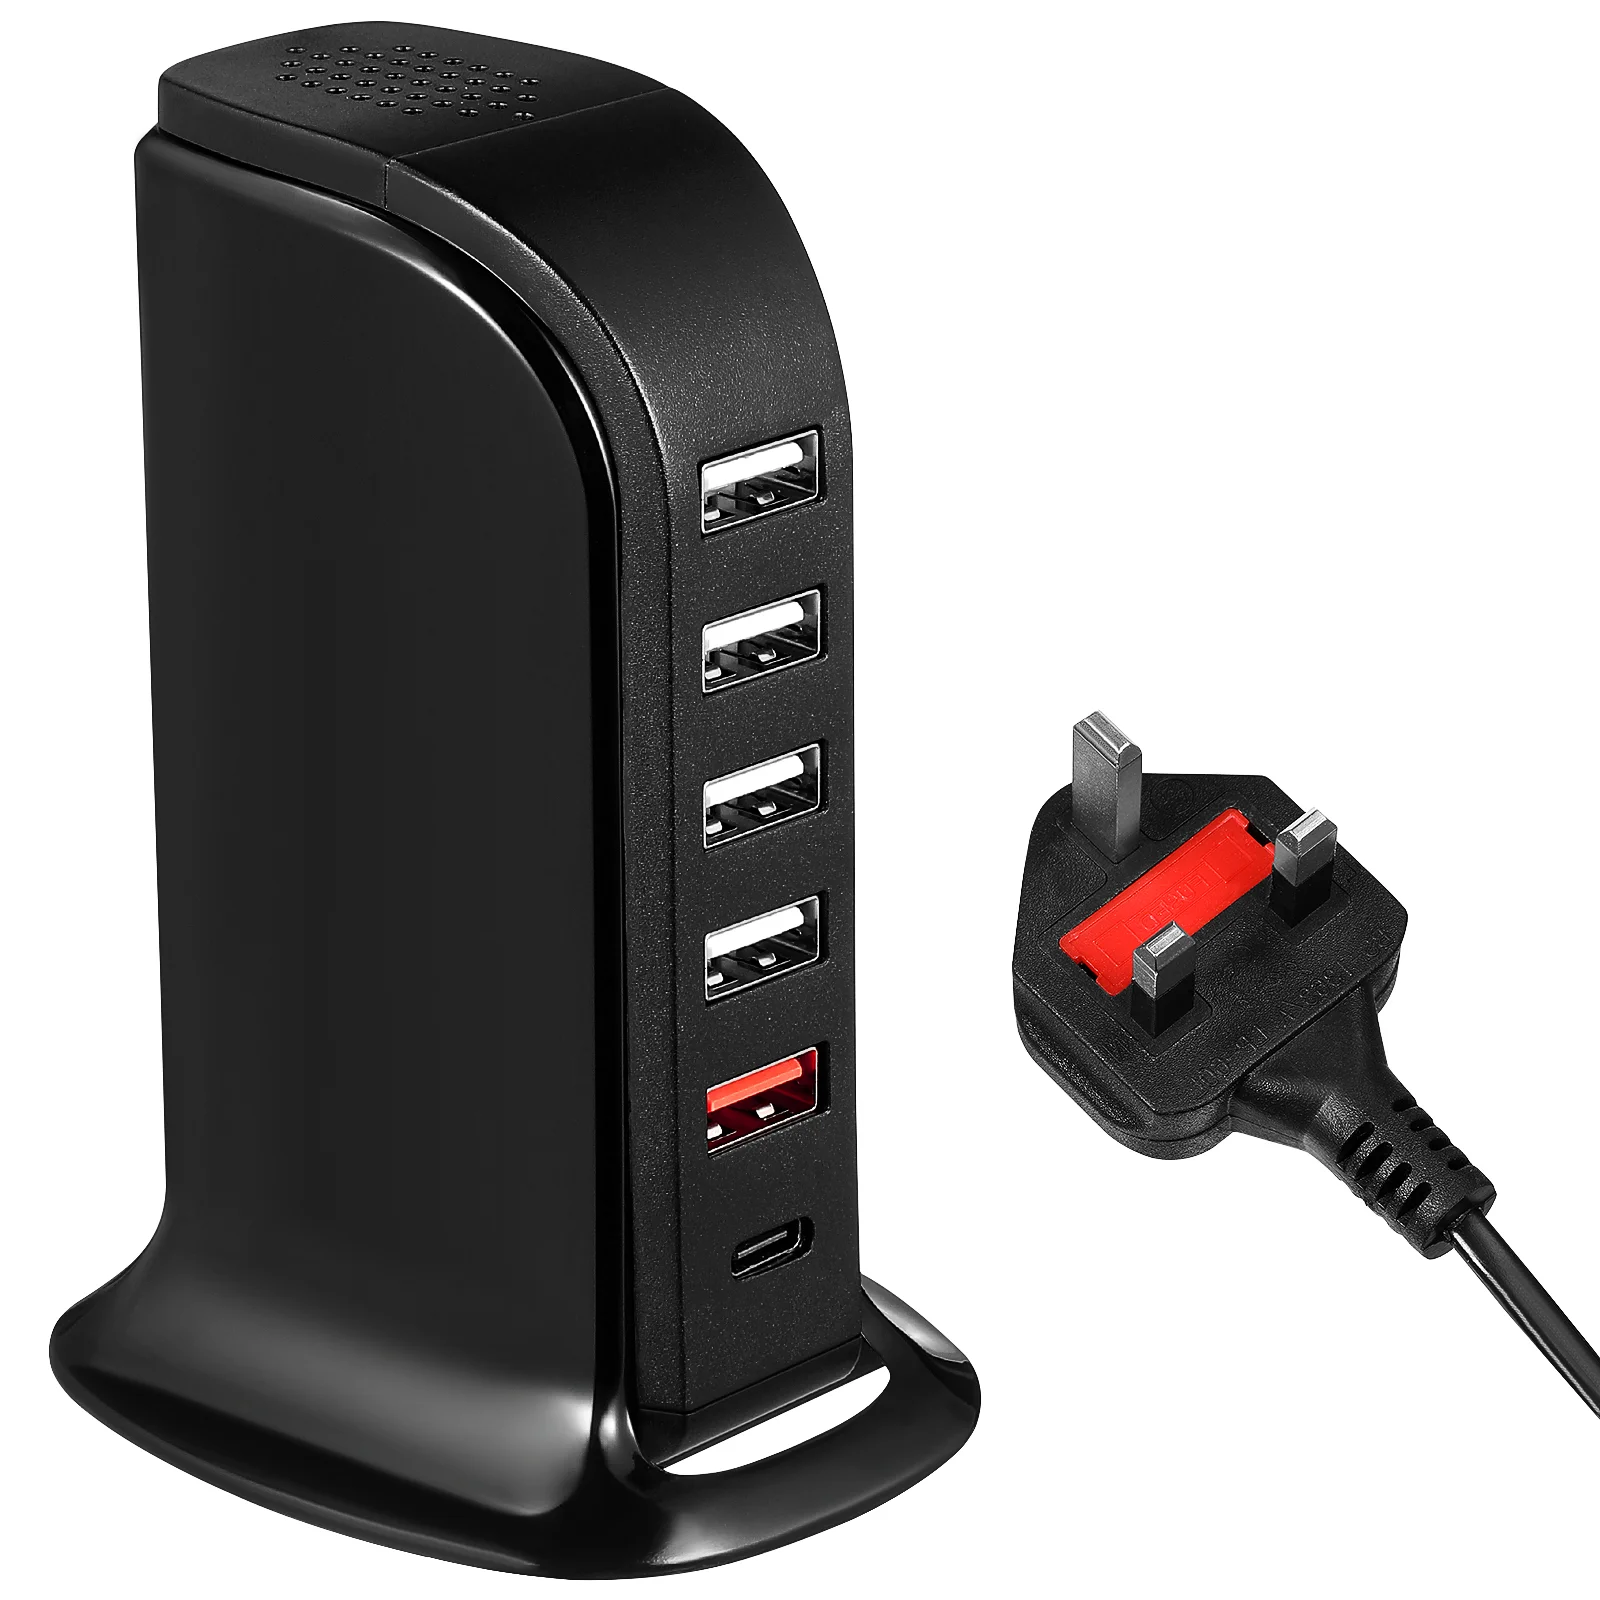 

40 W Charging Stations Multi Port 40w USB Socket Chargers Multiple Abs Tower Devices Outlet Block